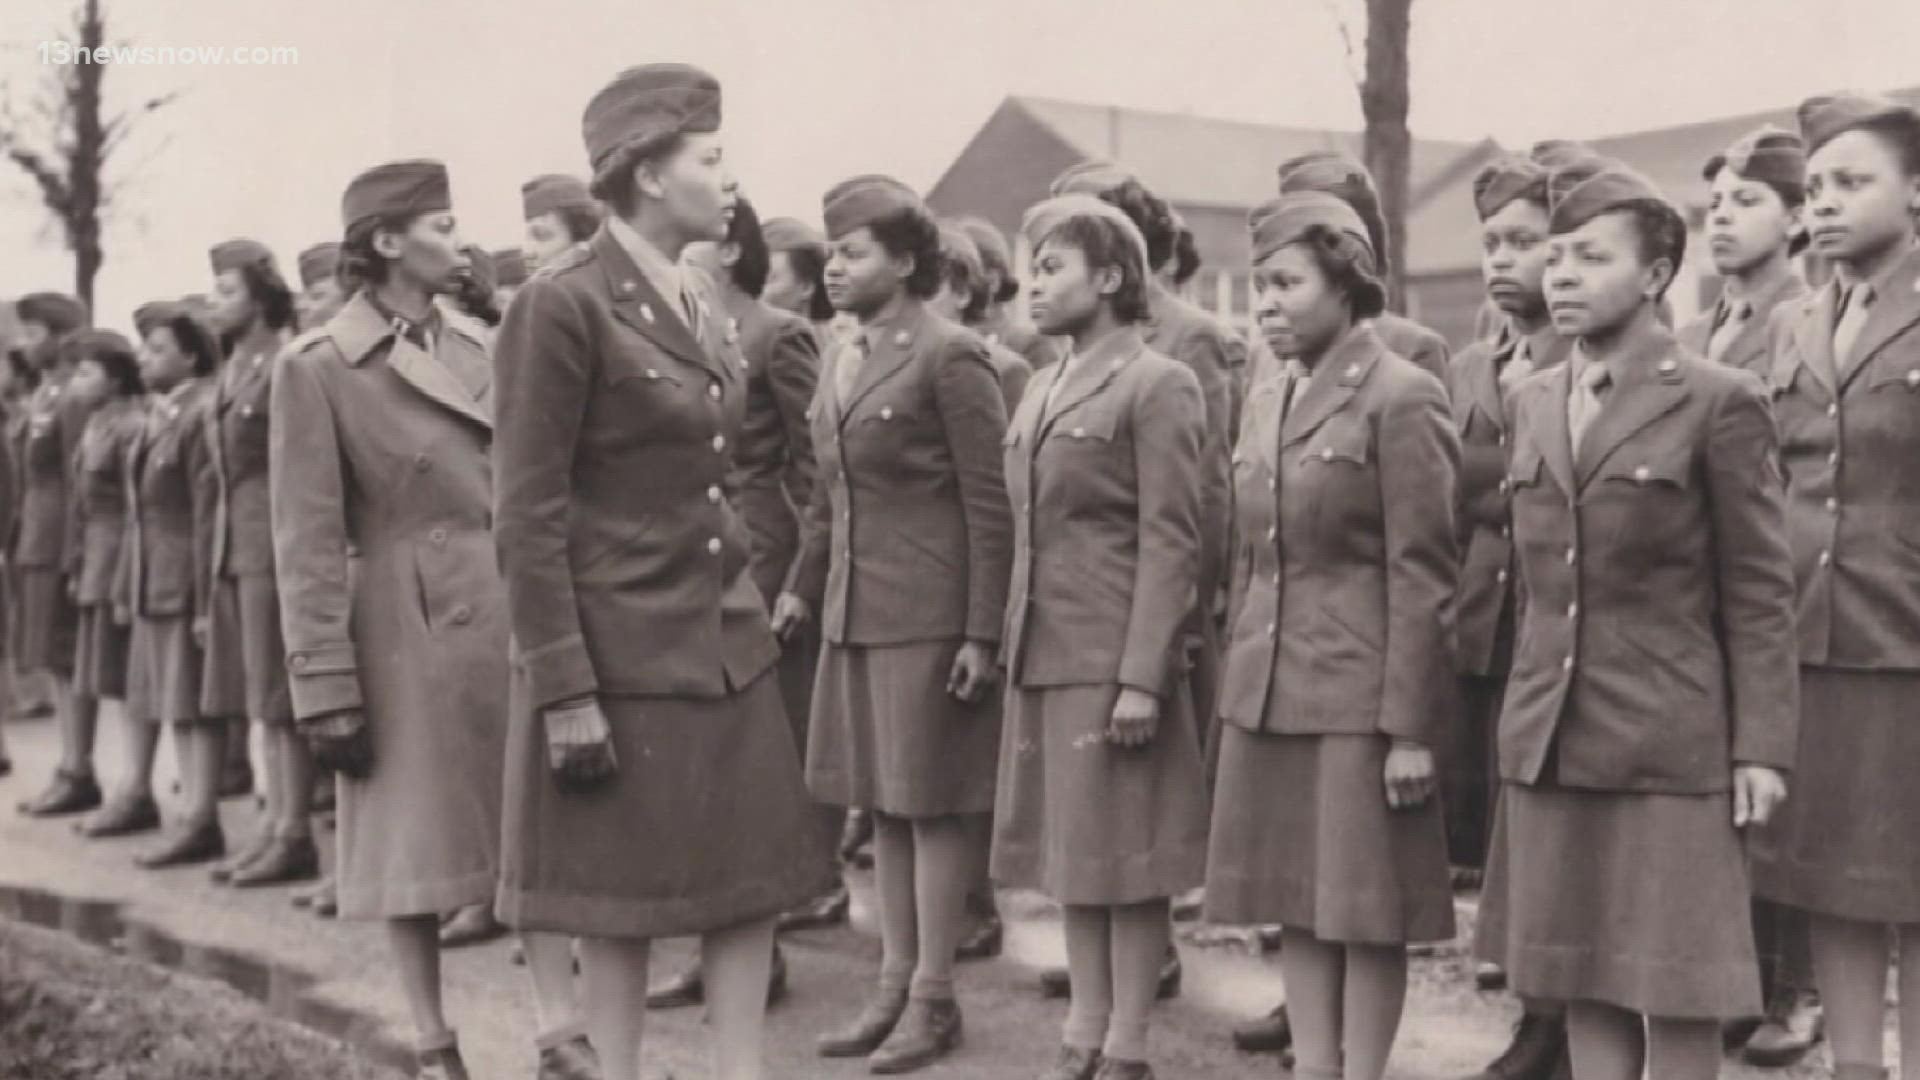 This Army unit consisted of 855 Black women who were tasked with clearing more than 17 million pieces of backlogged mail within three months in England.